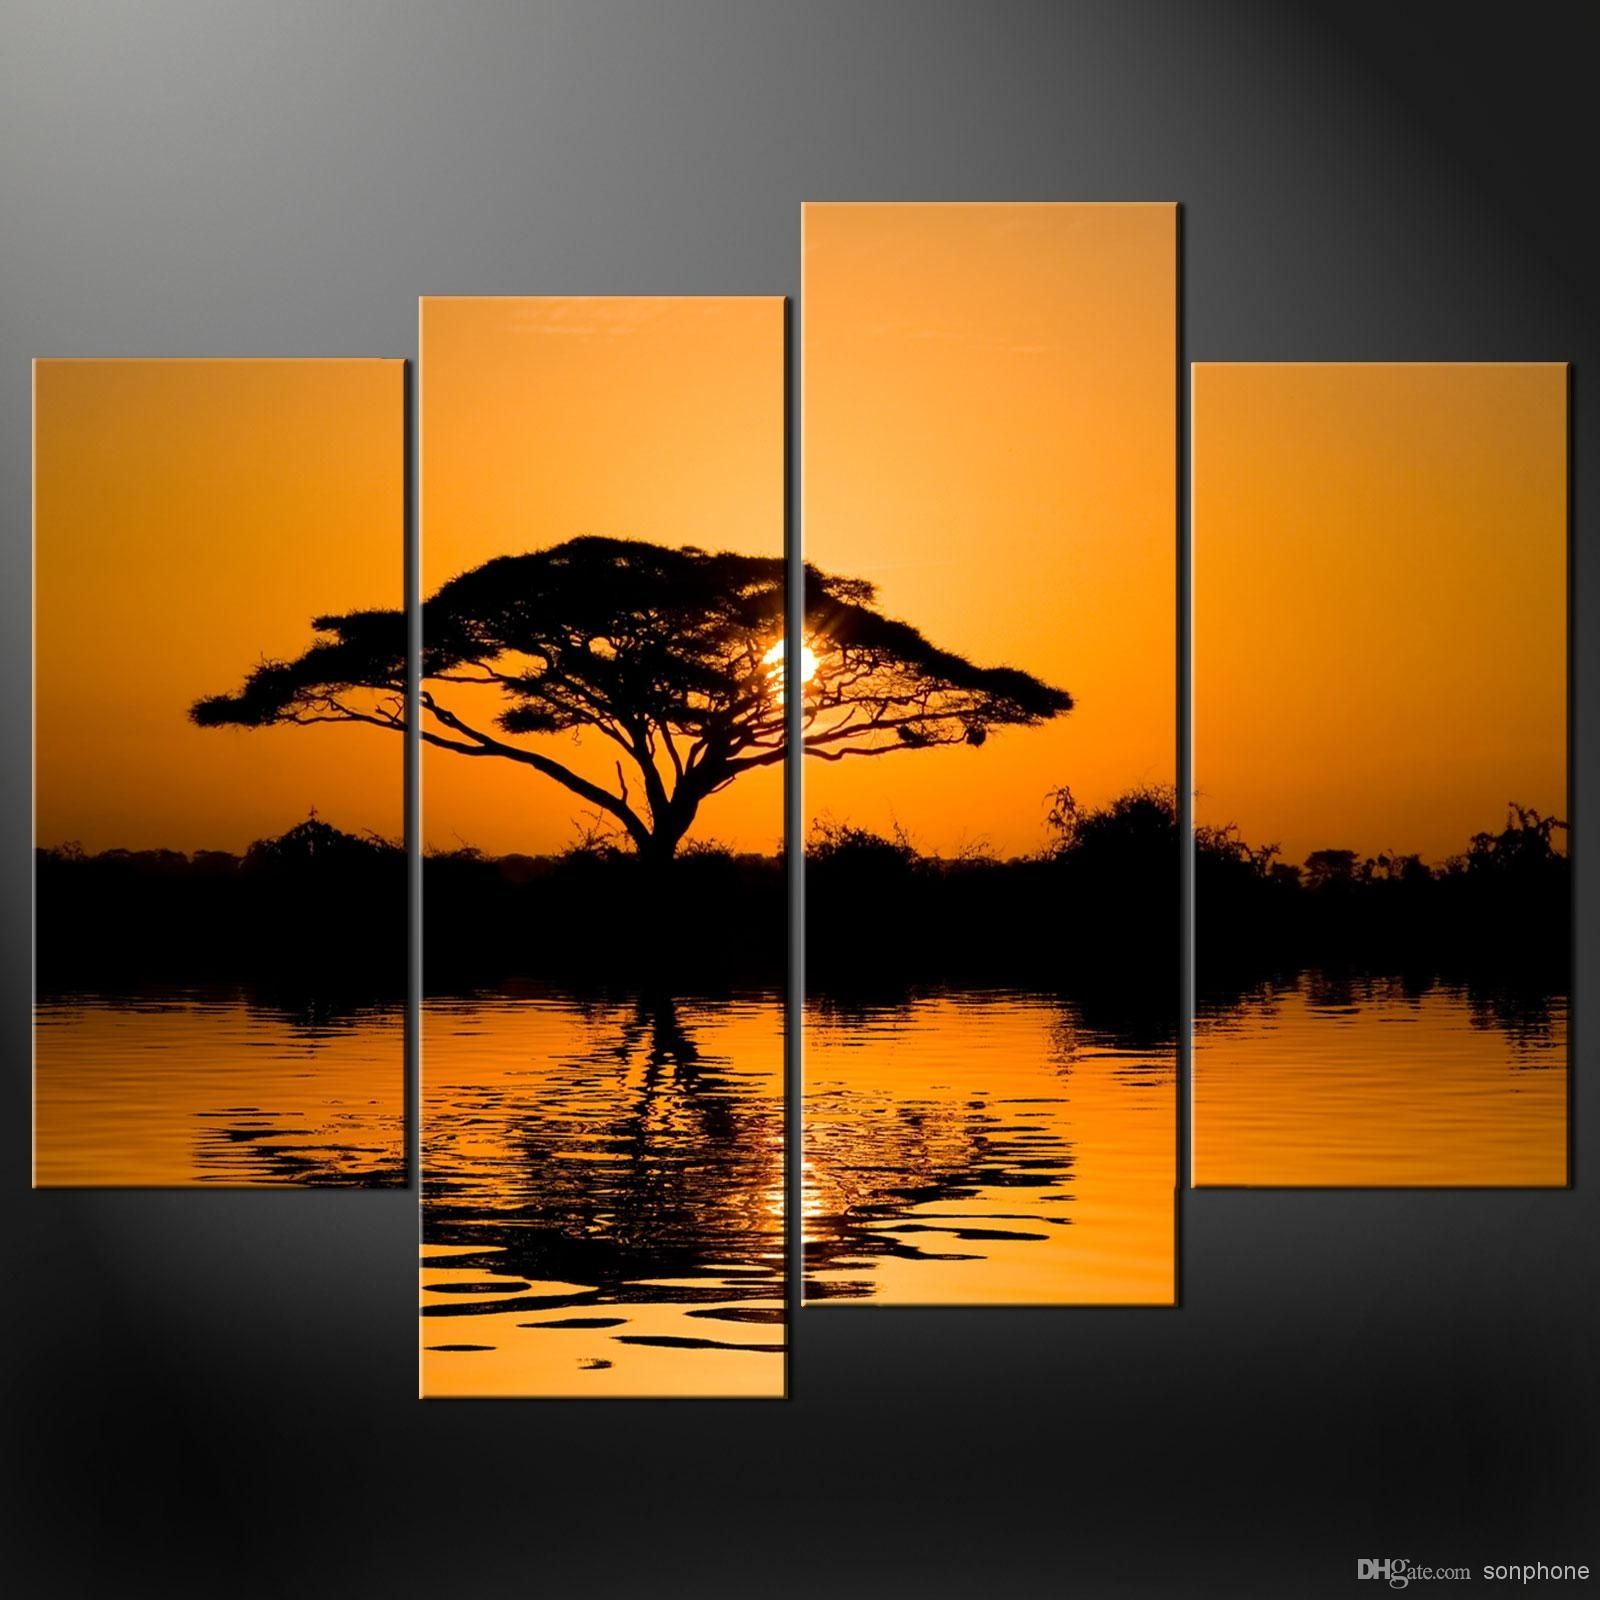 Framed 4 Panel Large African Wall Art Decor Modern Sunset Oil Pertaining To Large Framed Canvas Wall Art (View 20 of 20)